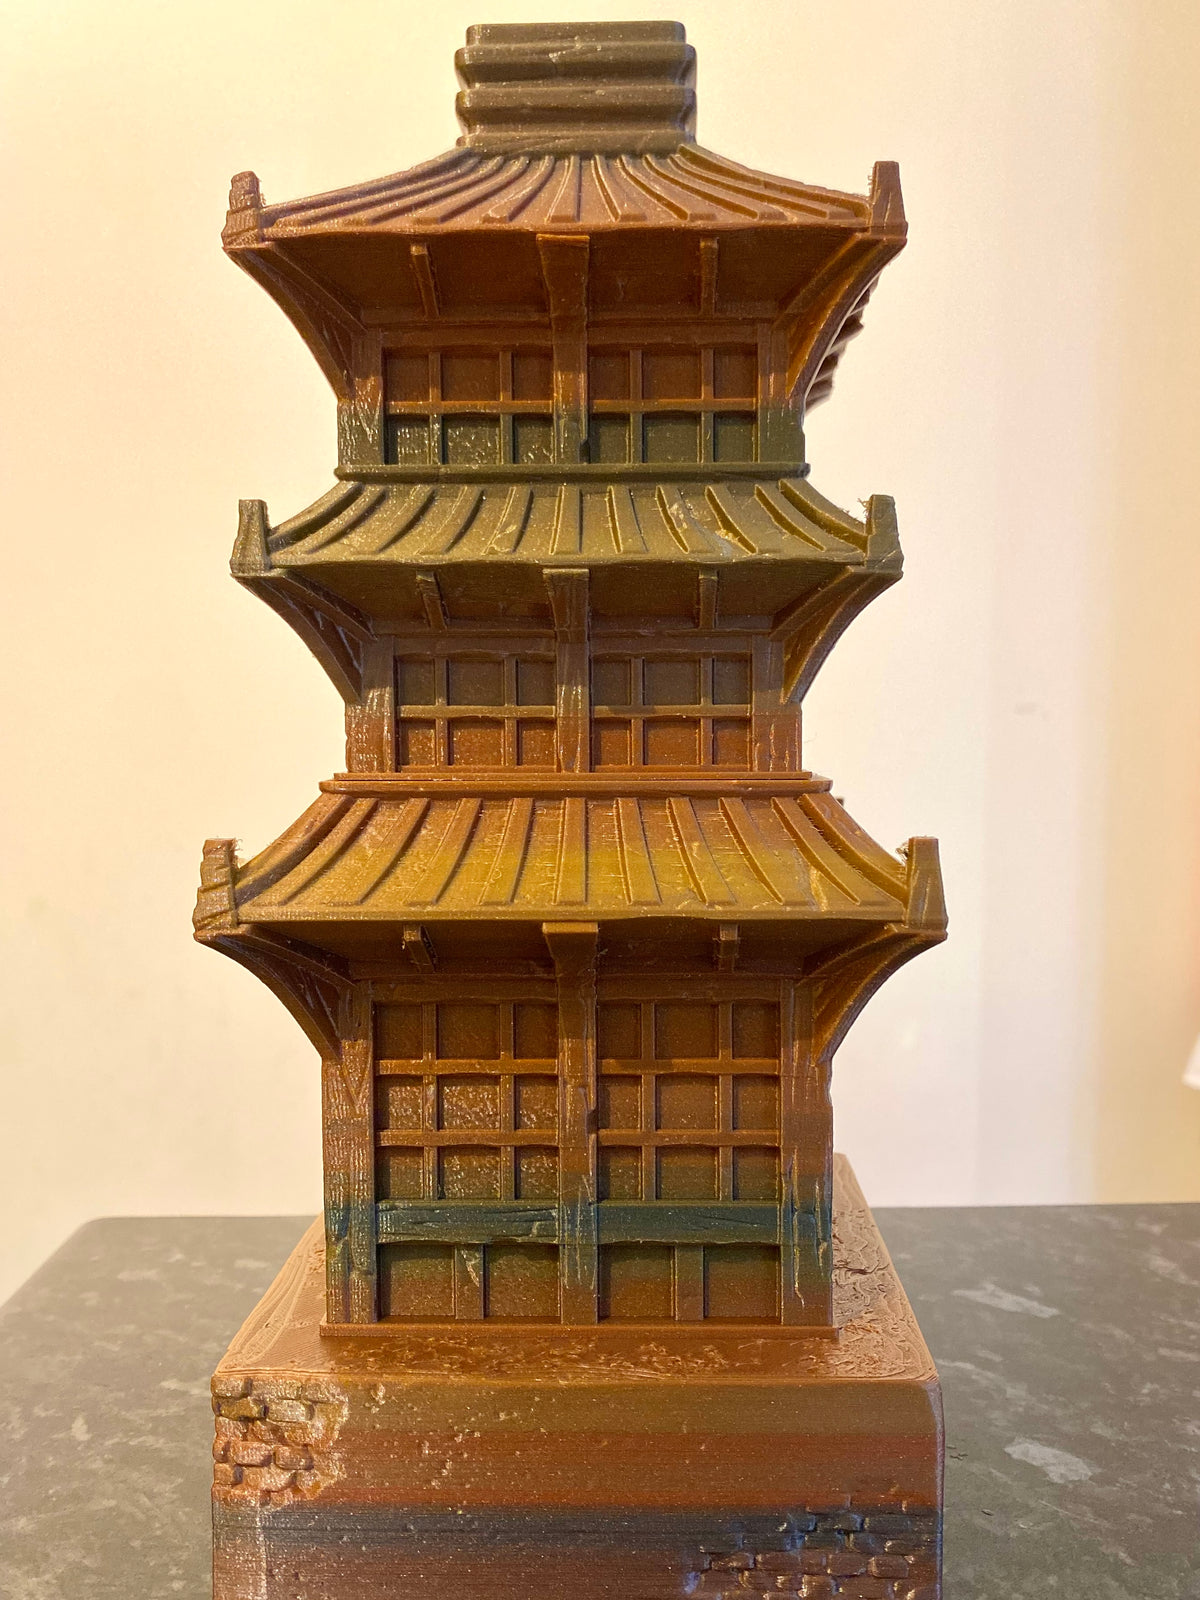 The Game of Destiny - 'Oriental Tower' Dice Tower